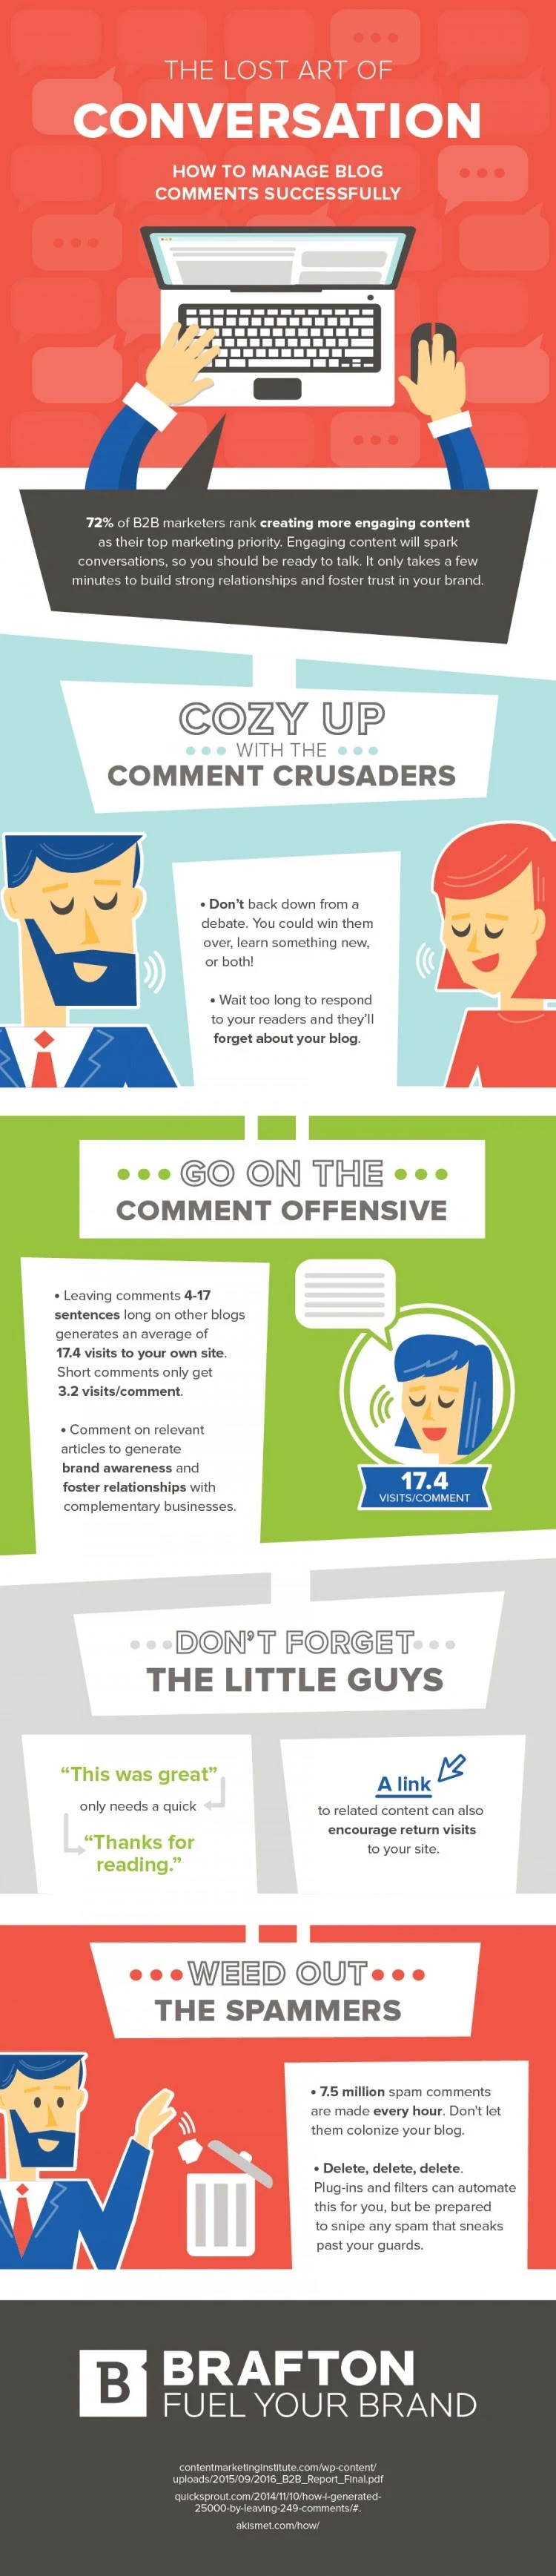 How to Manage Blog Comments Successfully - #infographic